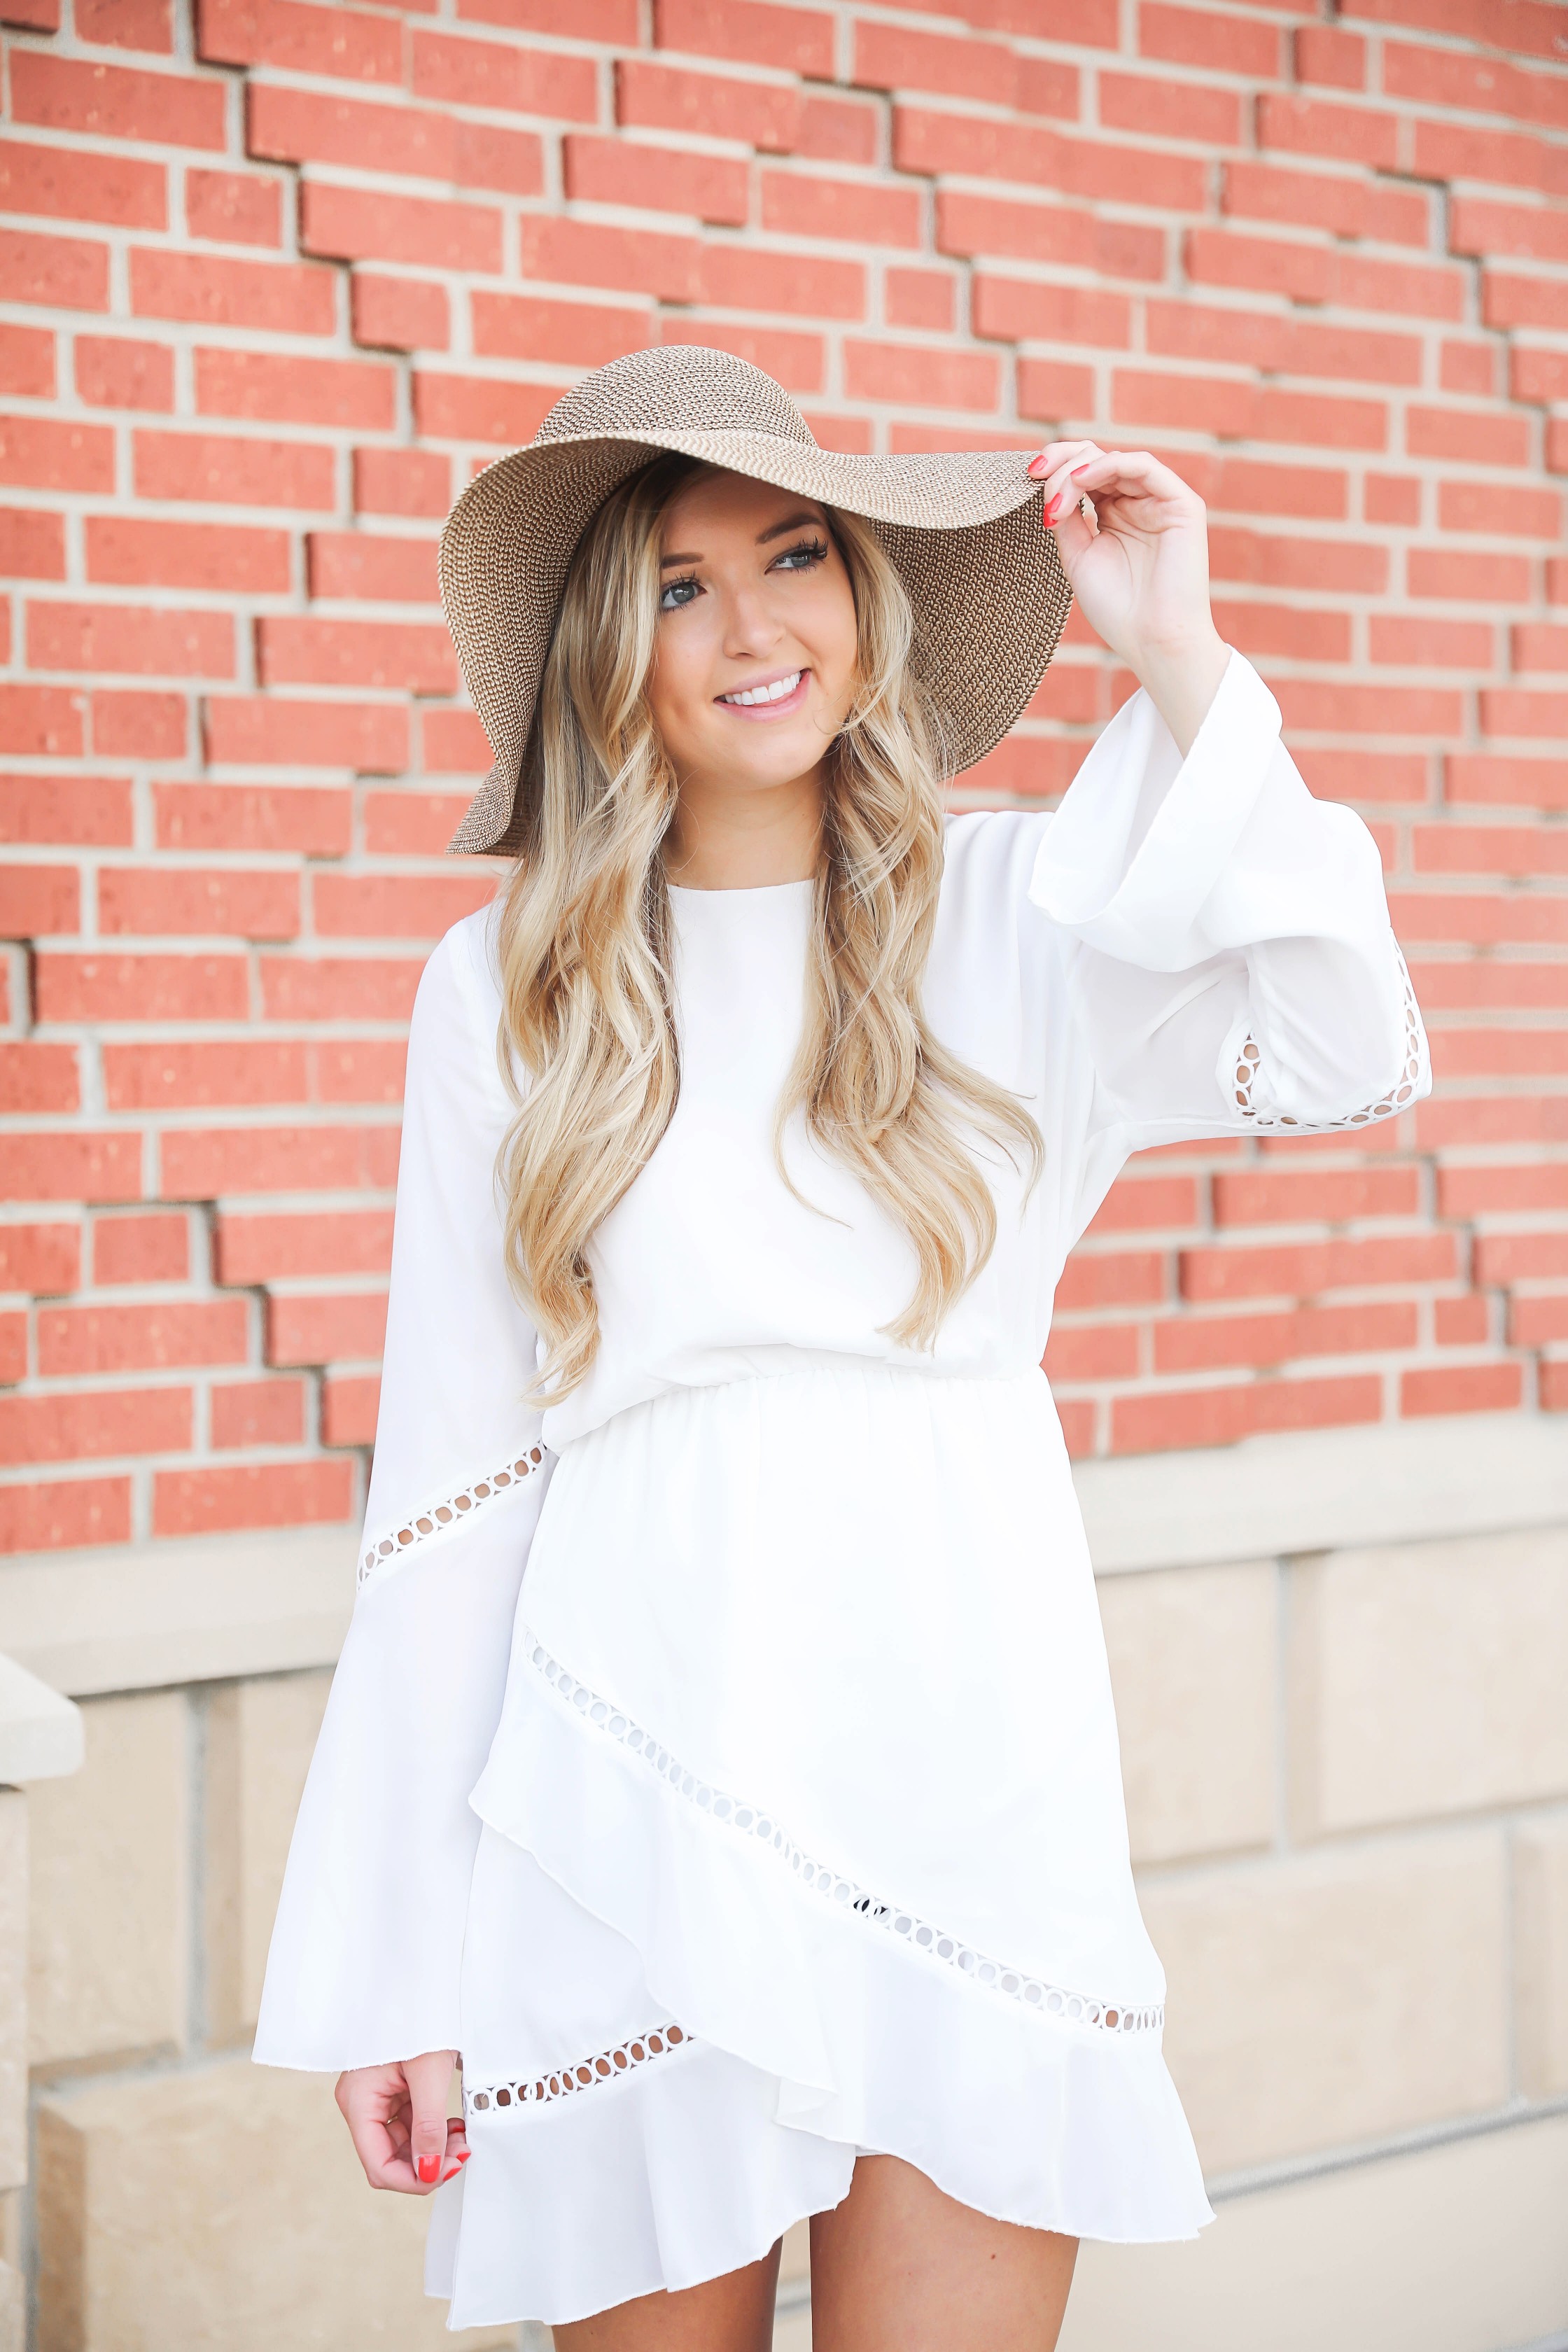 White dress roundup for sorority recruitment! During sorority recruitment a lot of girls have to wear white dresses, so I thought I would roundup some cute ones! These are also just cute dresses for summer! Details on fashion blog daily dose of charm by lauren lindmark